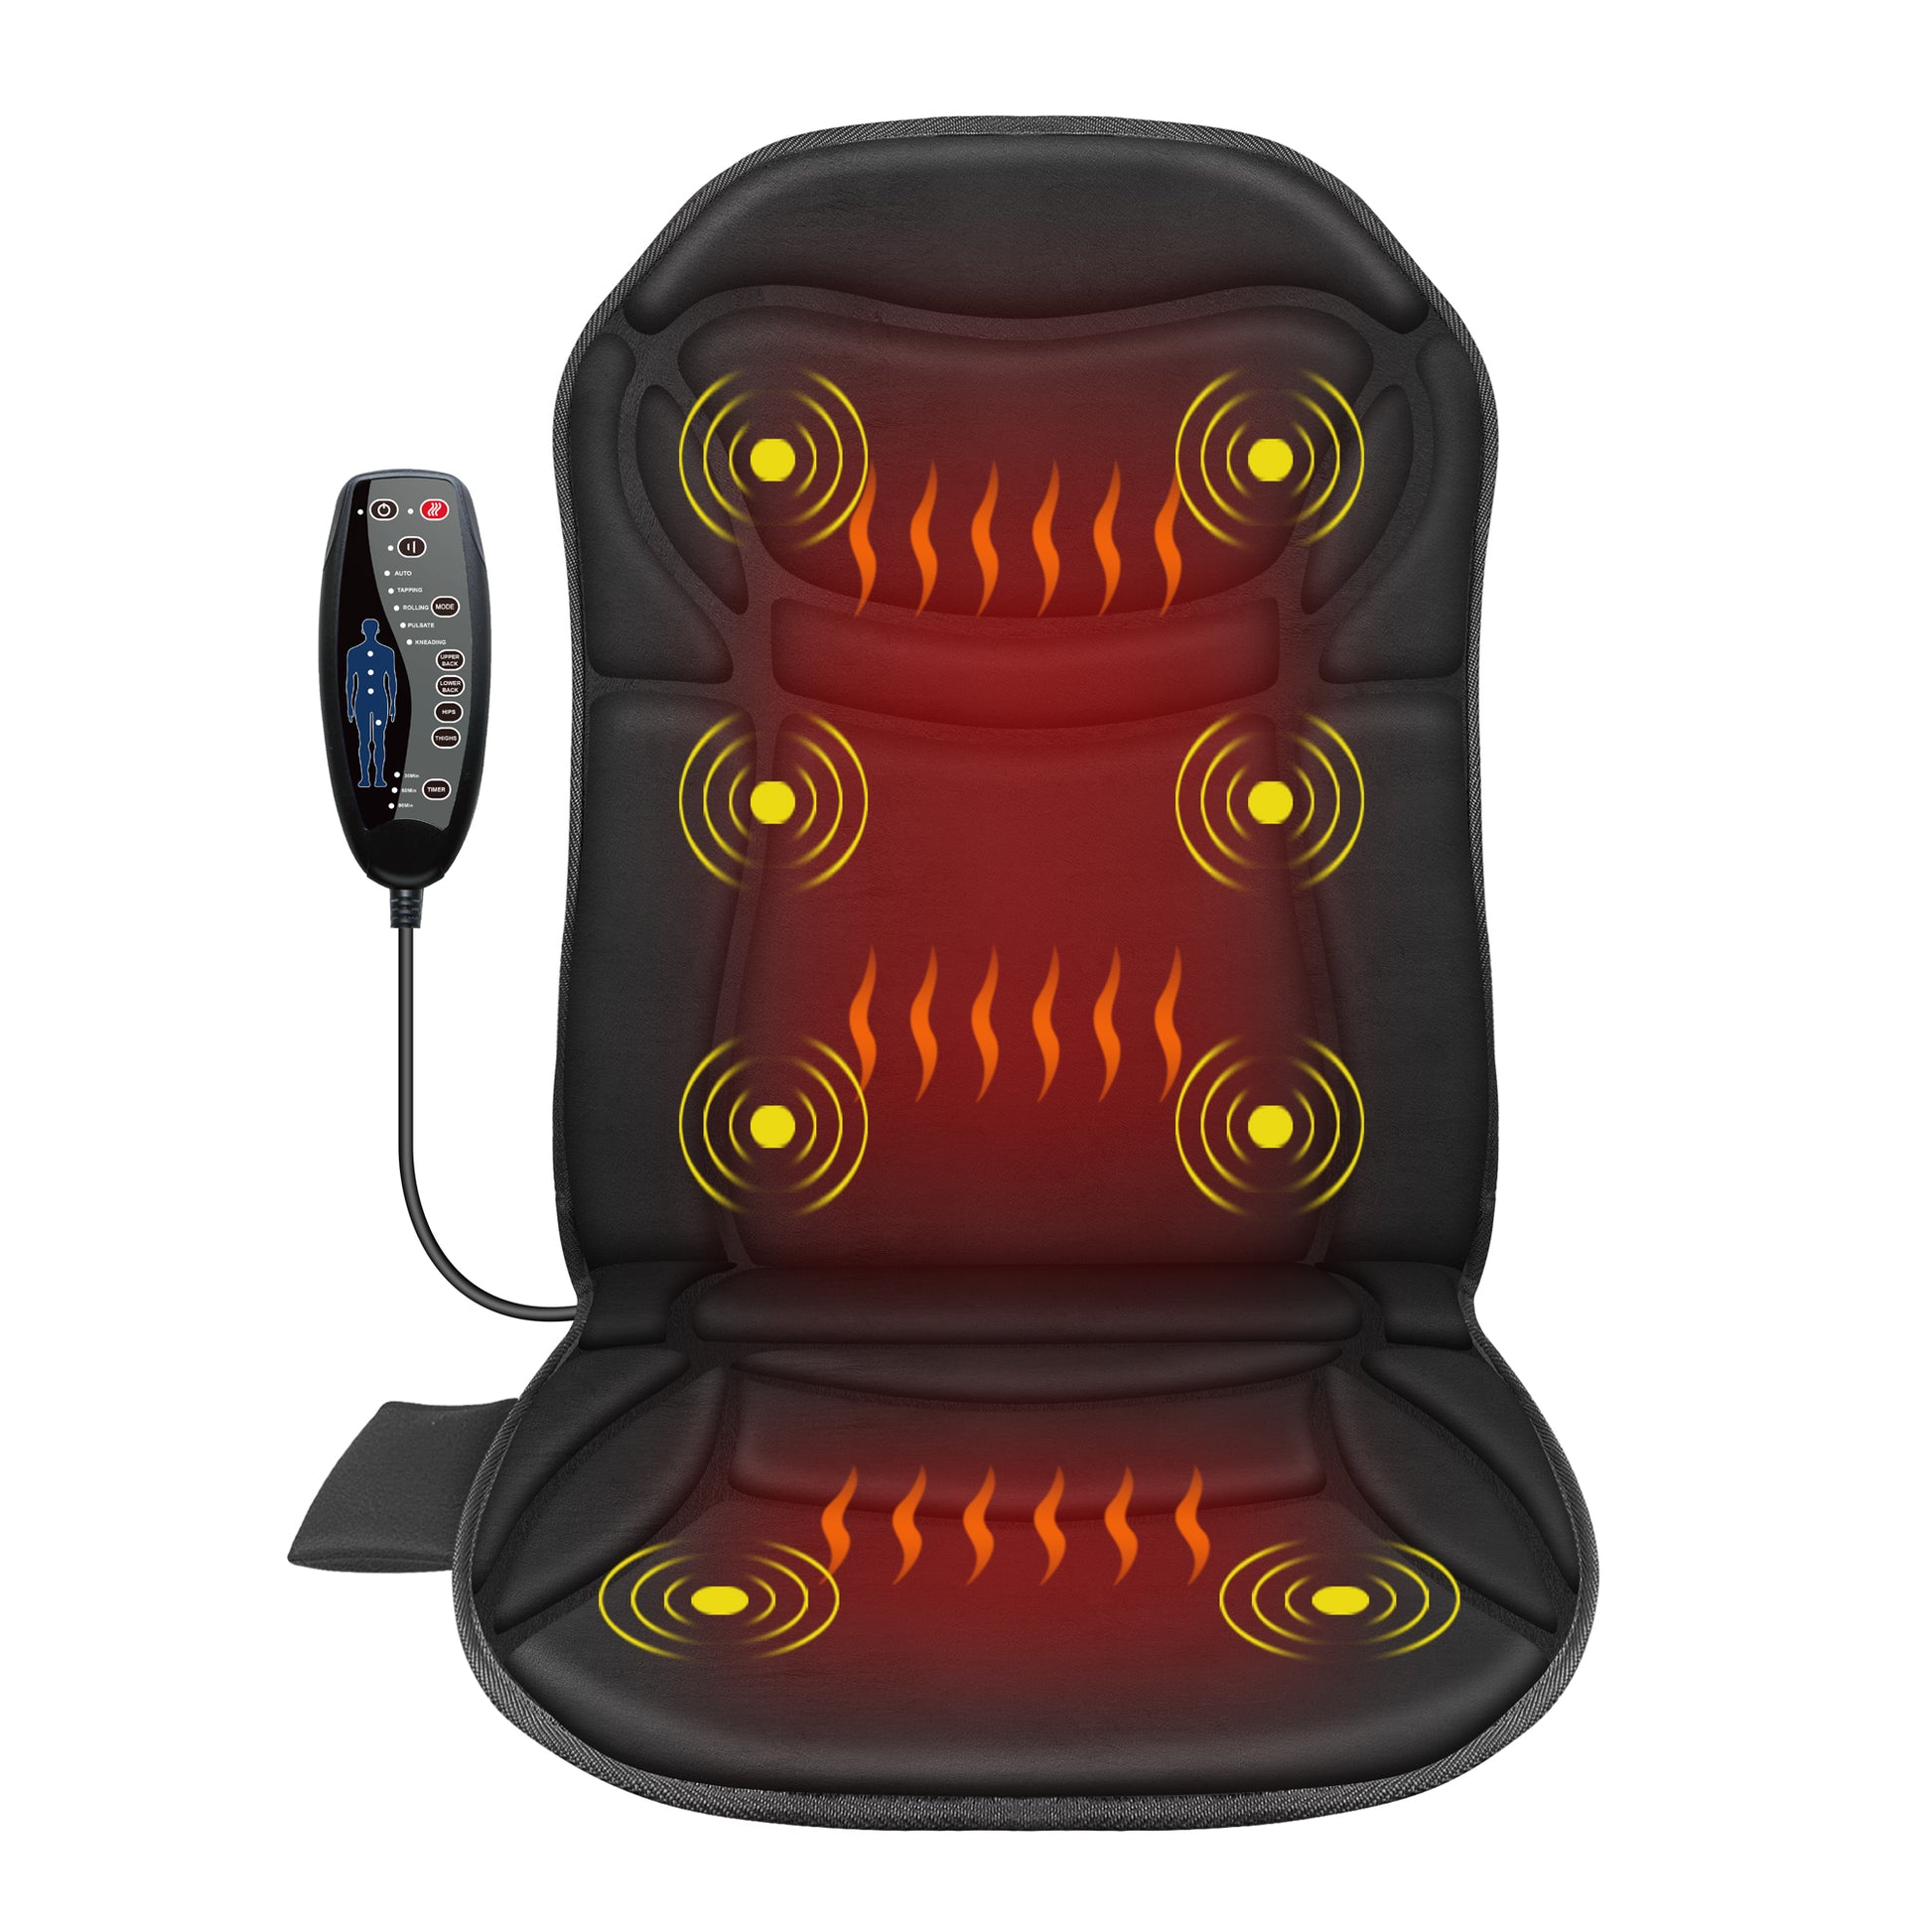 CuPiLo Massage Chair Pad,Electric Back Massager for Back Pain -- CP-2102